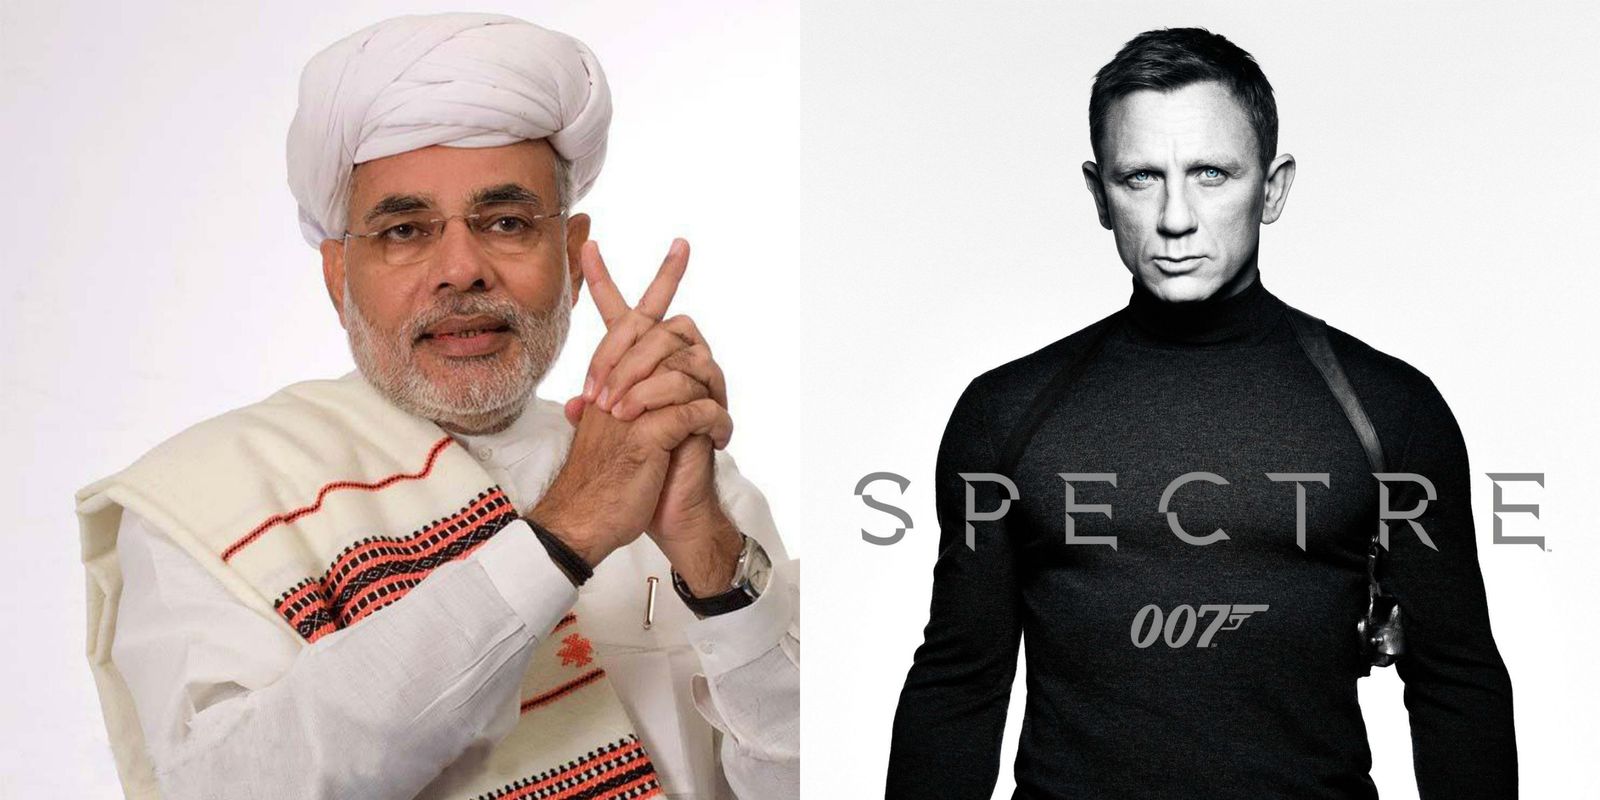 James Bond Becomes A Part Of PM Modi's Iconic Speech At Wembley, London